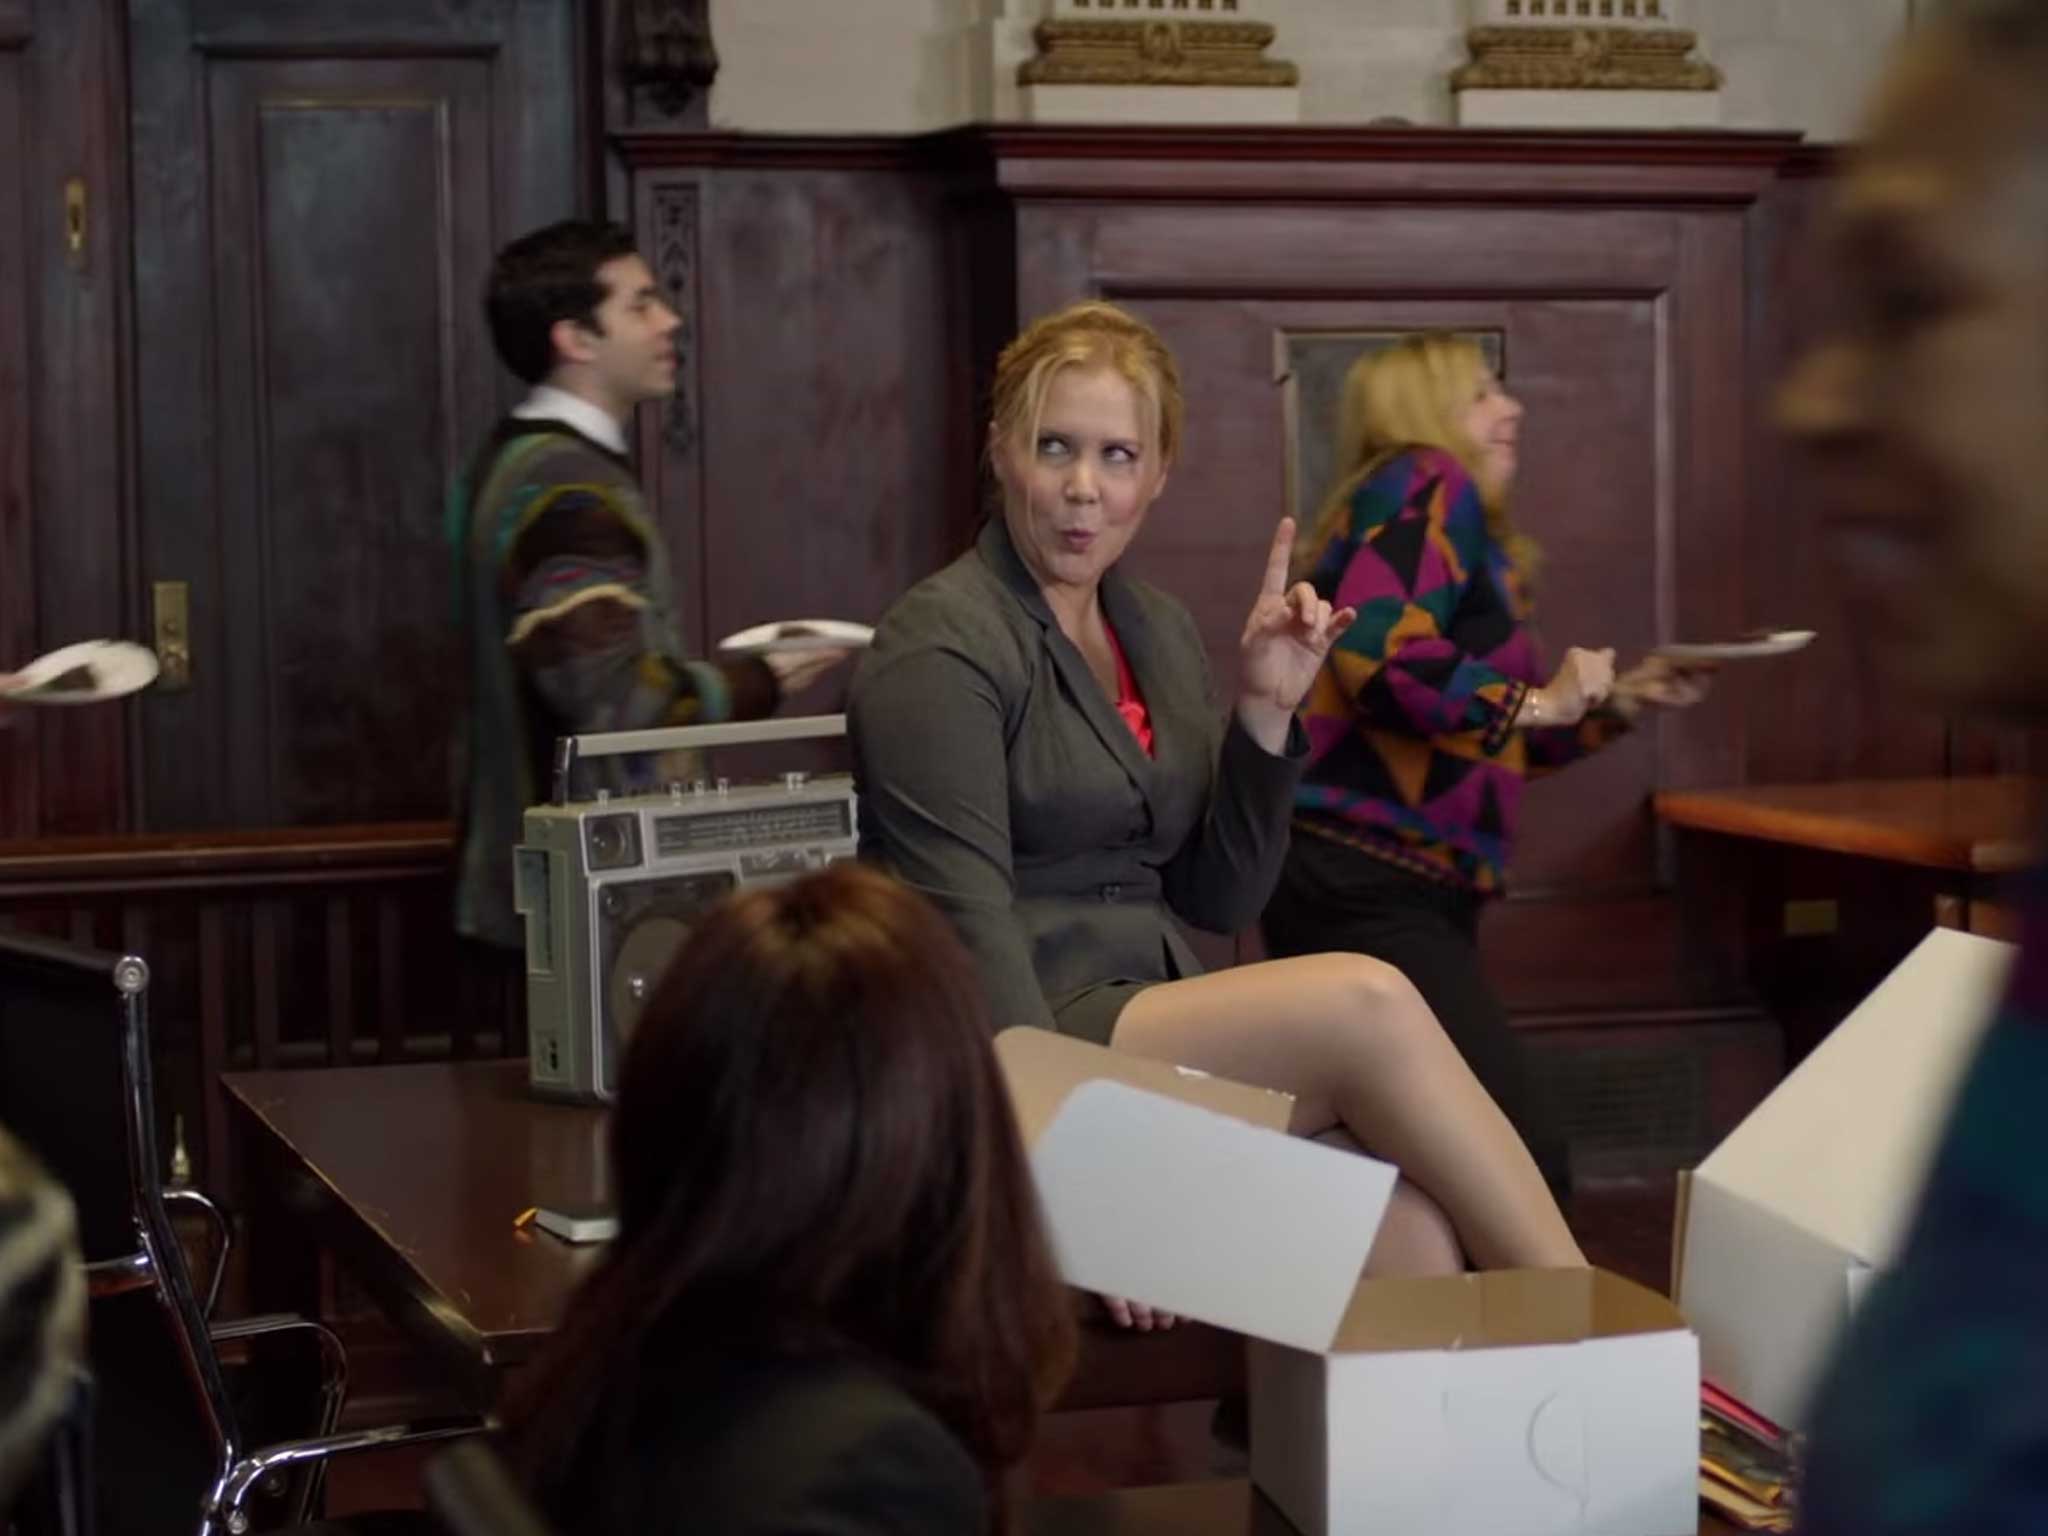 Amy Schumer puts Bill Cosby on trial in the court of public opinion ...